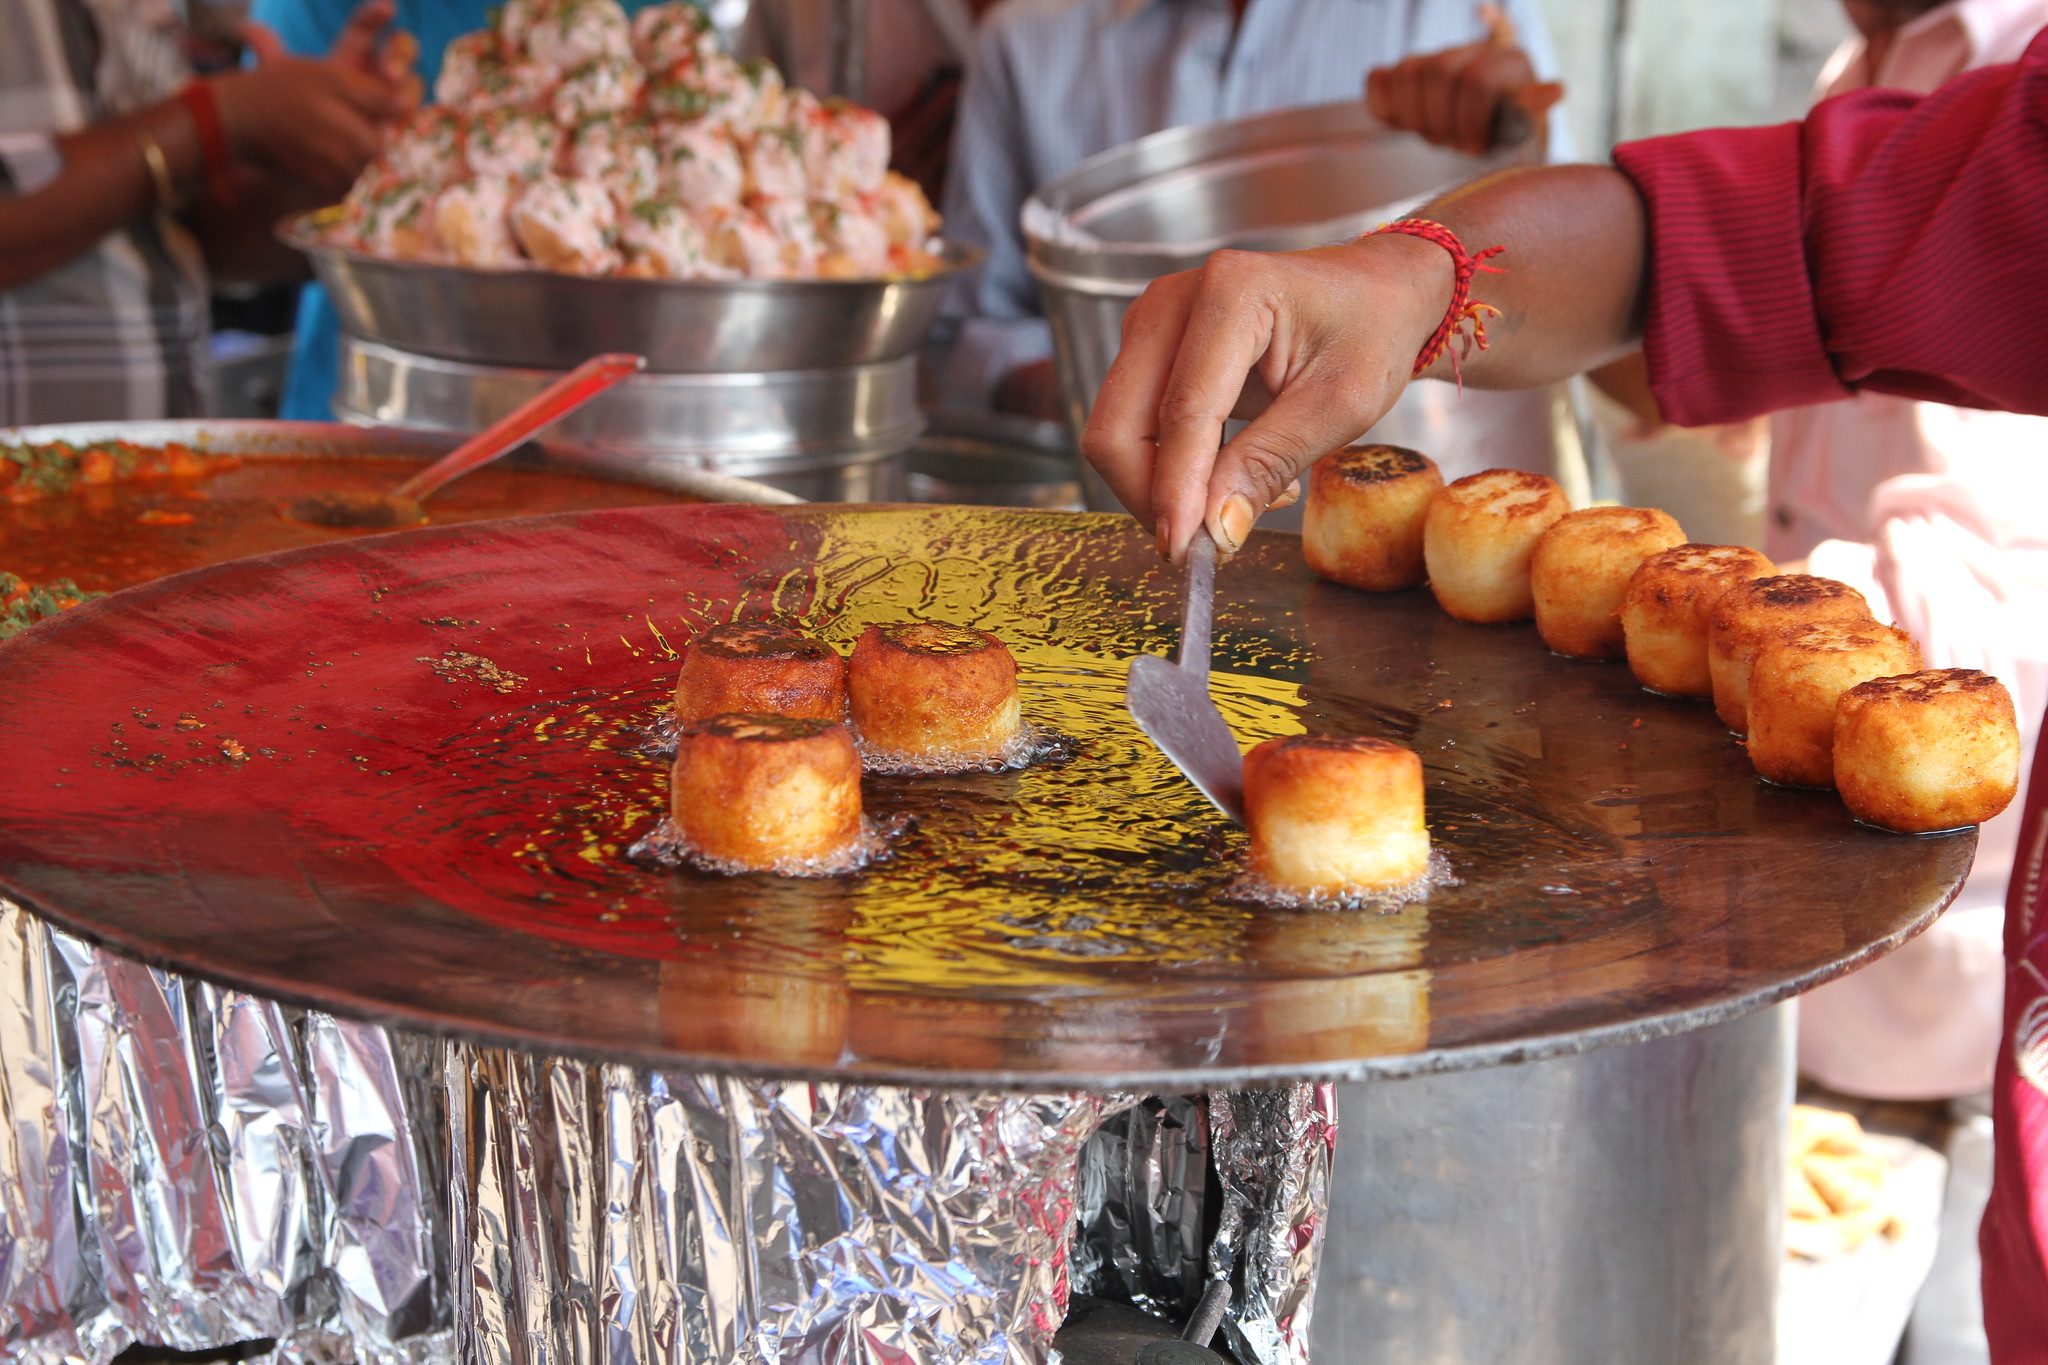 Aloo-tikkis being fried, Image Source: Flickr